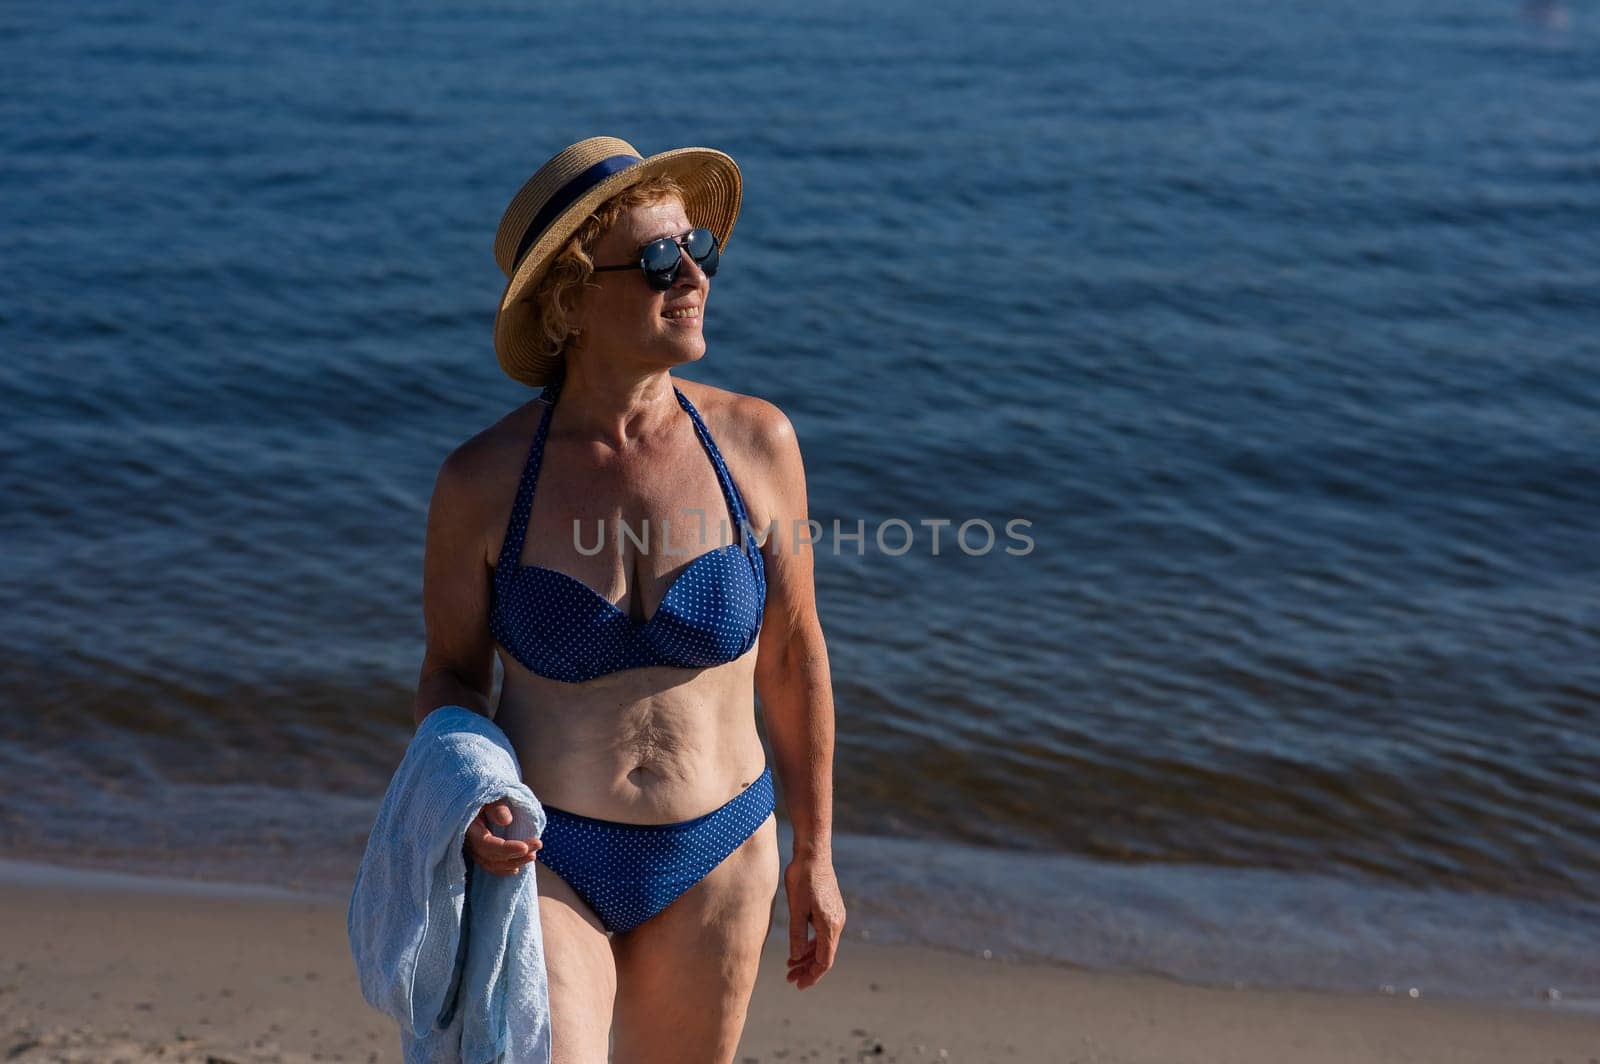 An old woman in a straw hat, sunglasses and a swimsuit is resting on the beach. by mrwed54